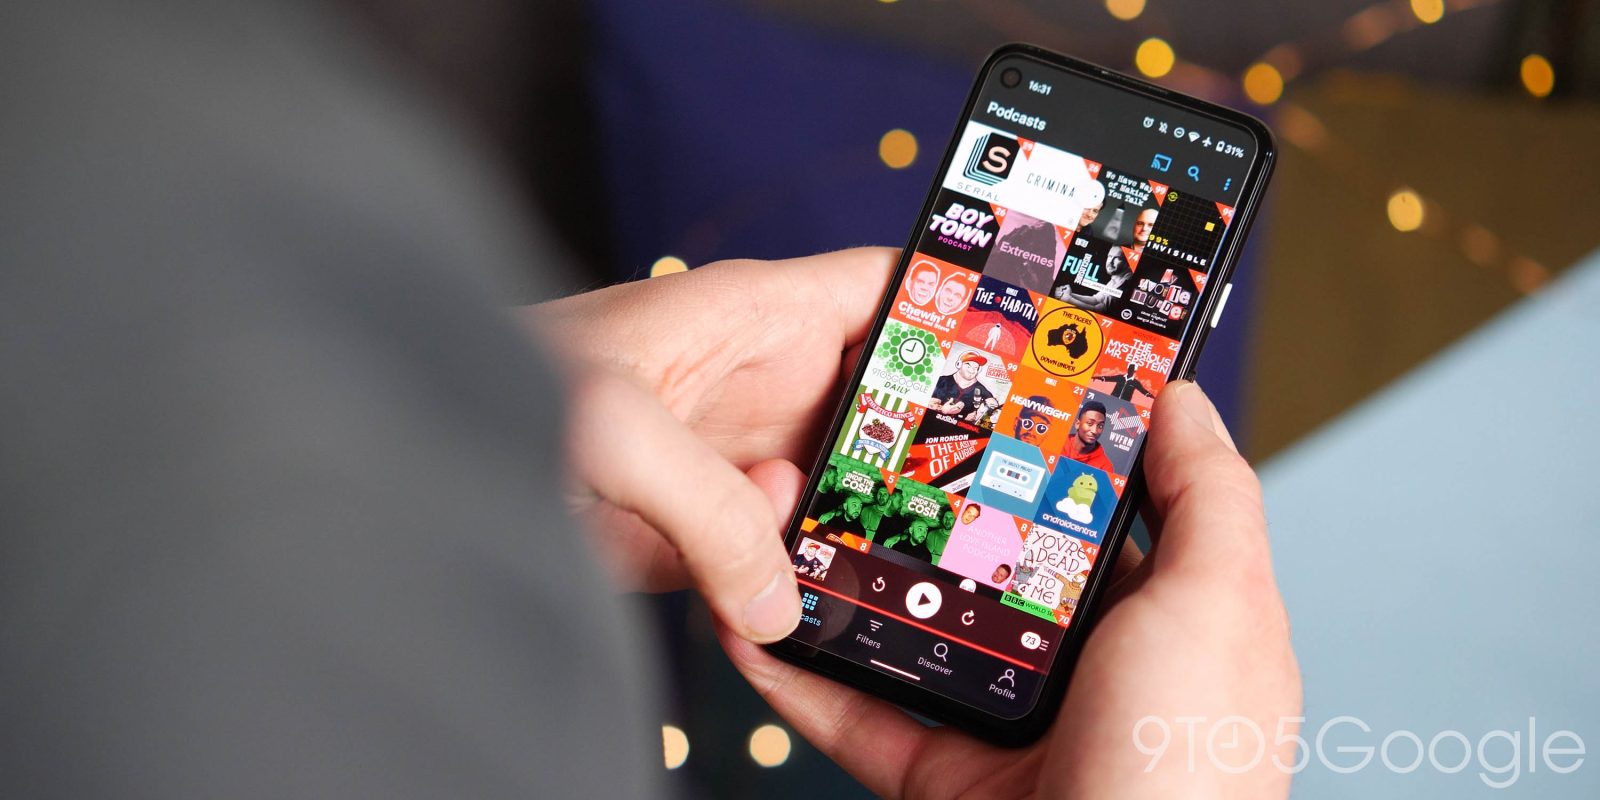 Pocket Casts redesigns widgets, grid, & mini player, adds ‘Up Next’ tab